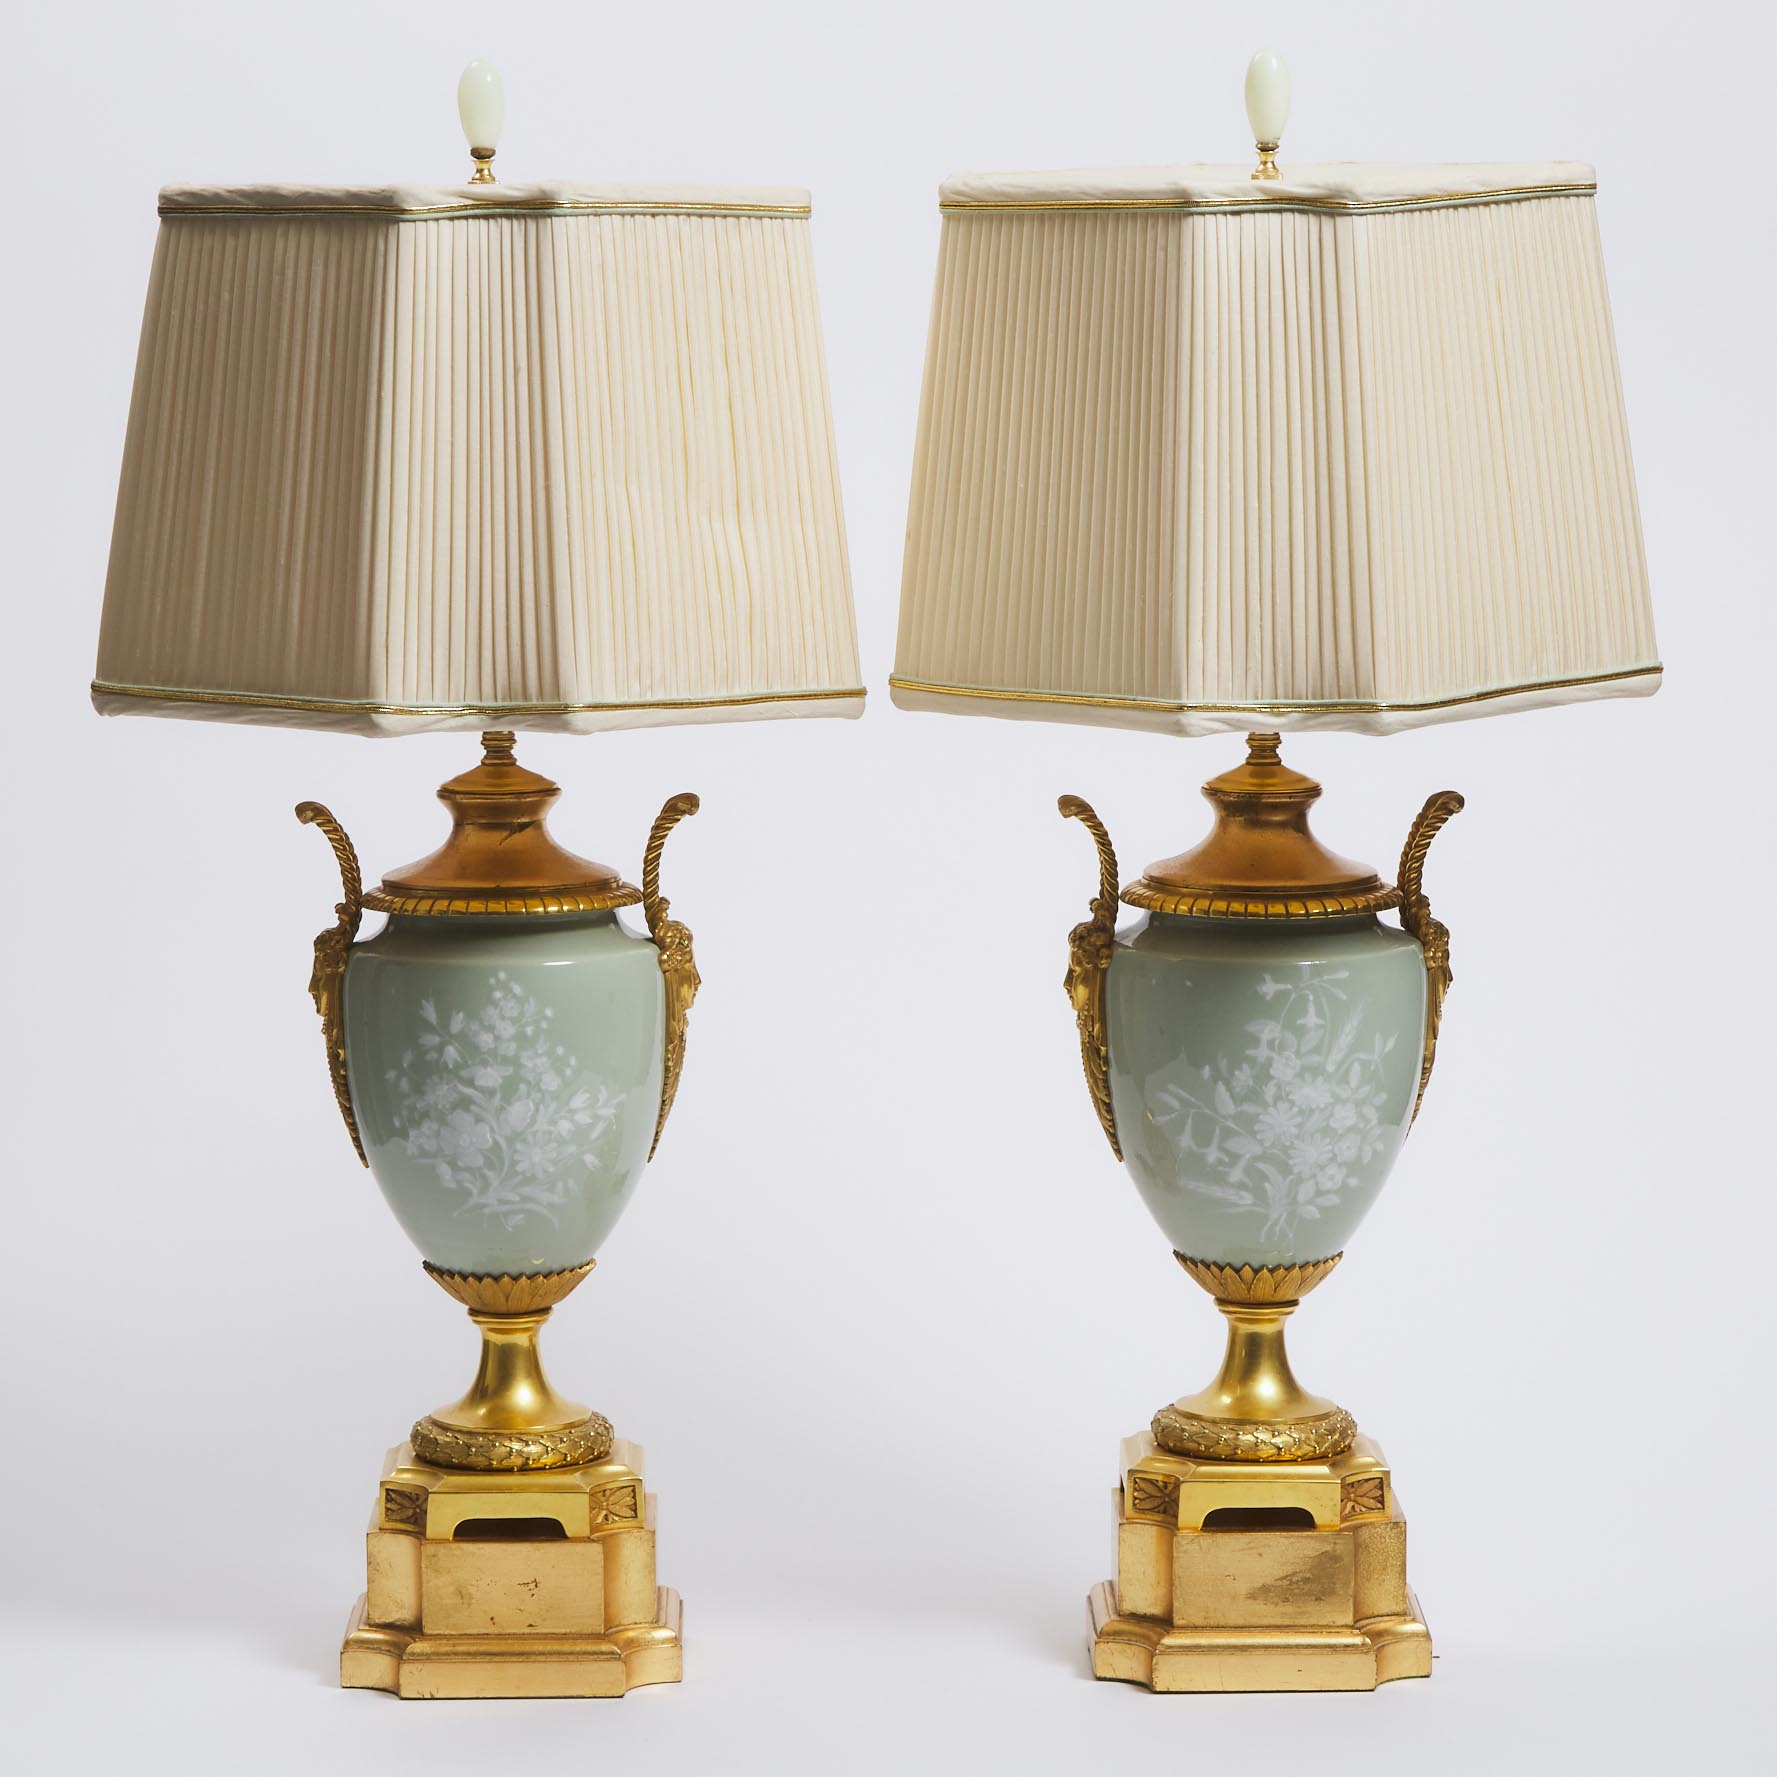 Pair of French Neoclassical Ormolu Mounted Celadon Pâte-sur-Pâte Porcelain Table Lamps, mid 20th century